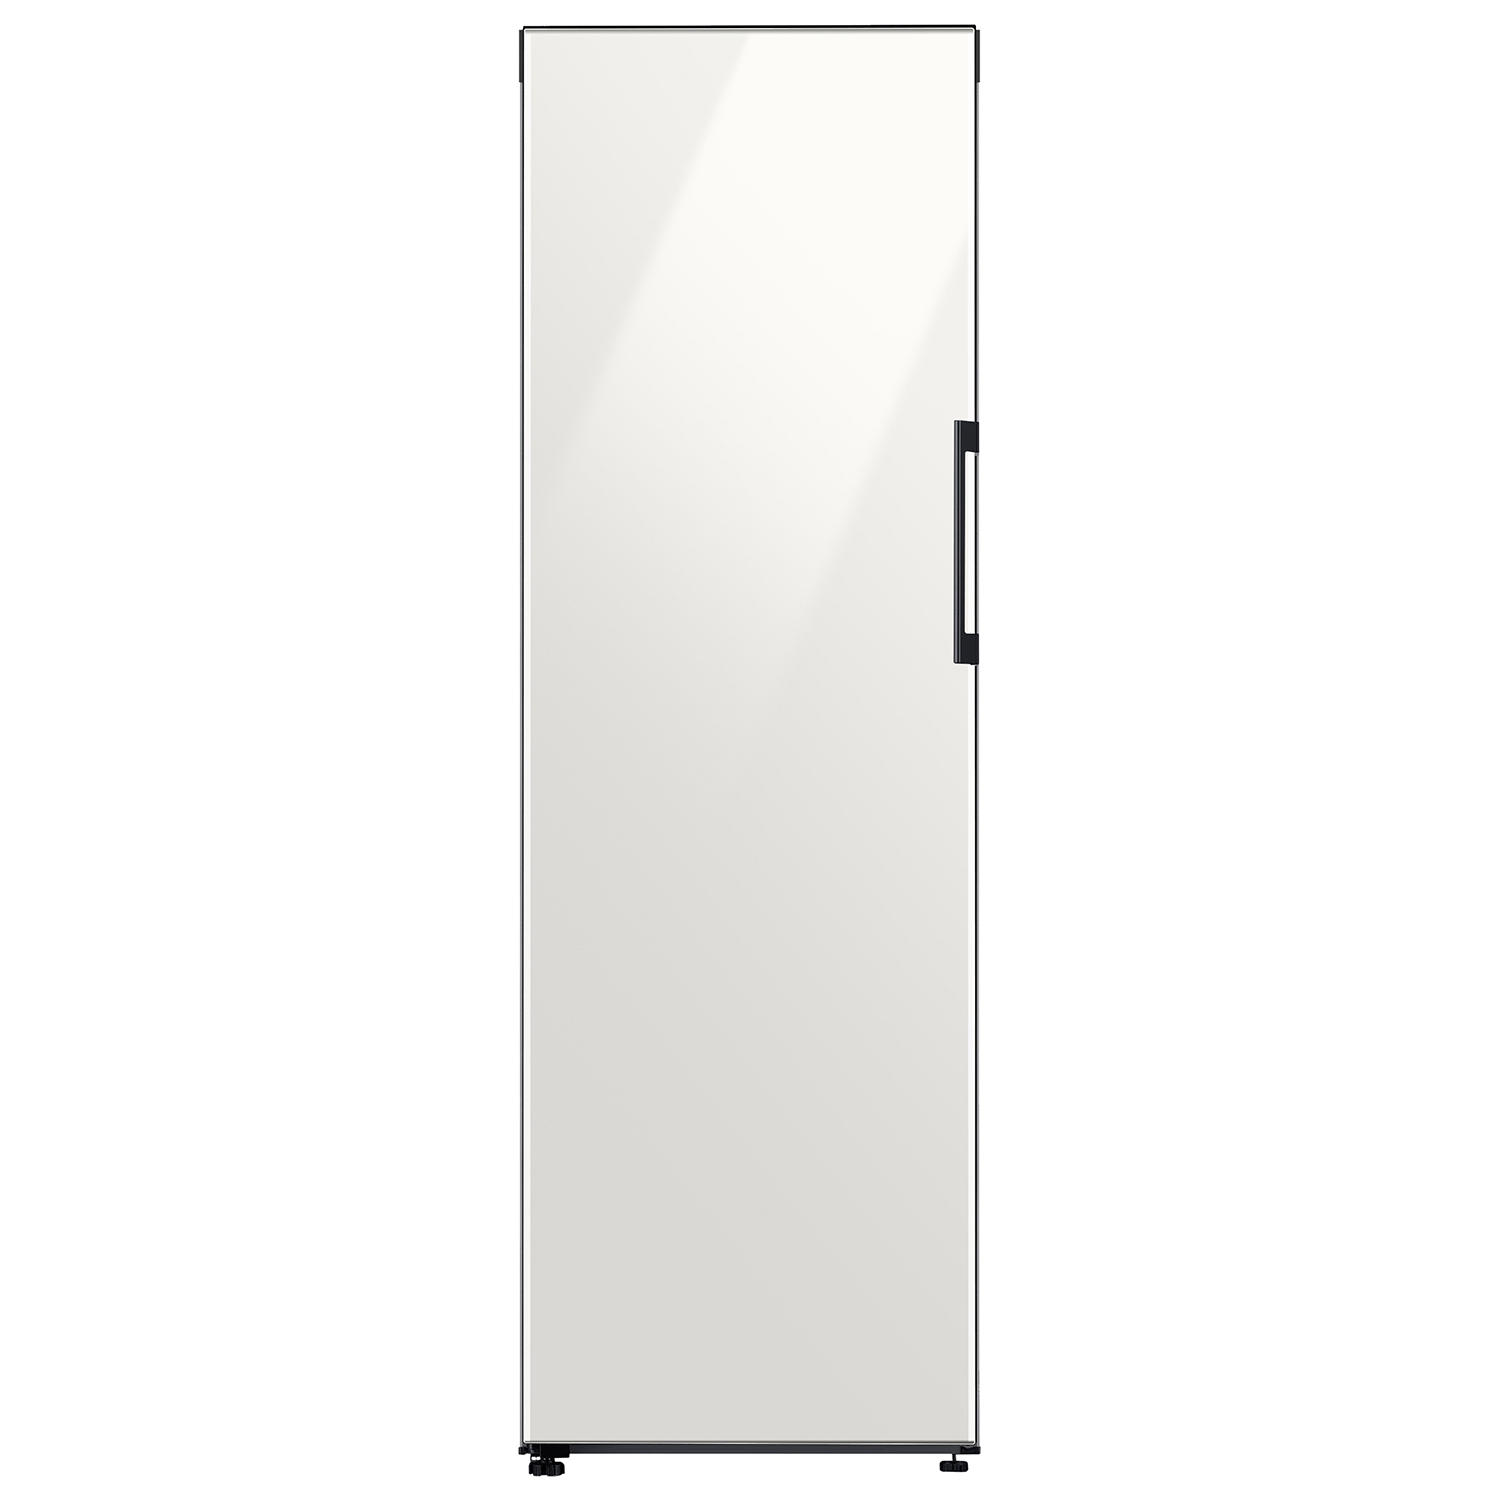 Samsung 11.4 cu. ft. BESPOKE Flex Column Refrigerator with Customizable Colors and Flexible Design in Grey Glass